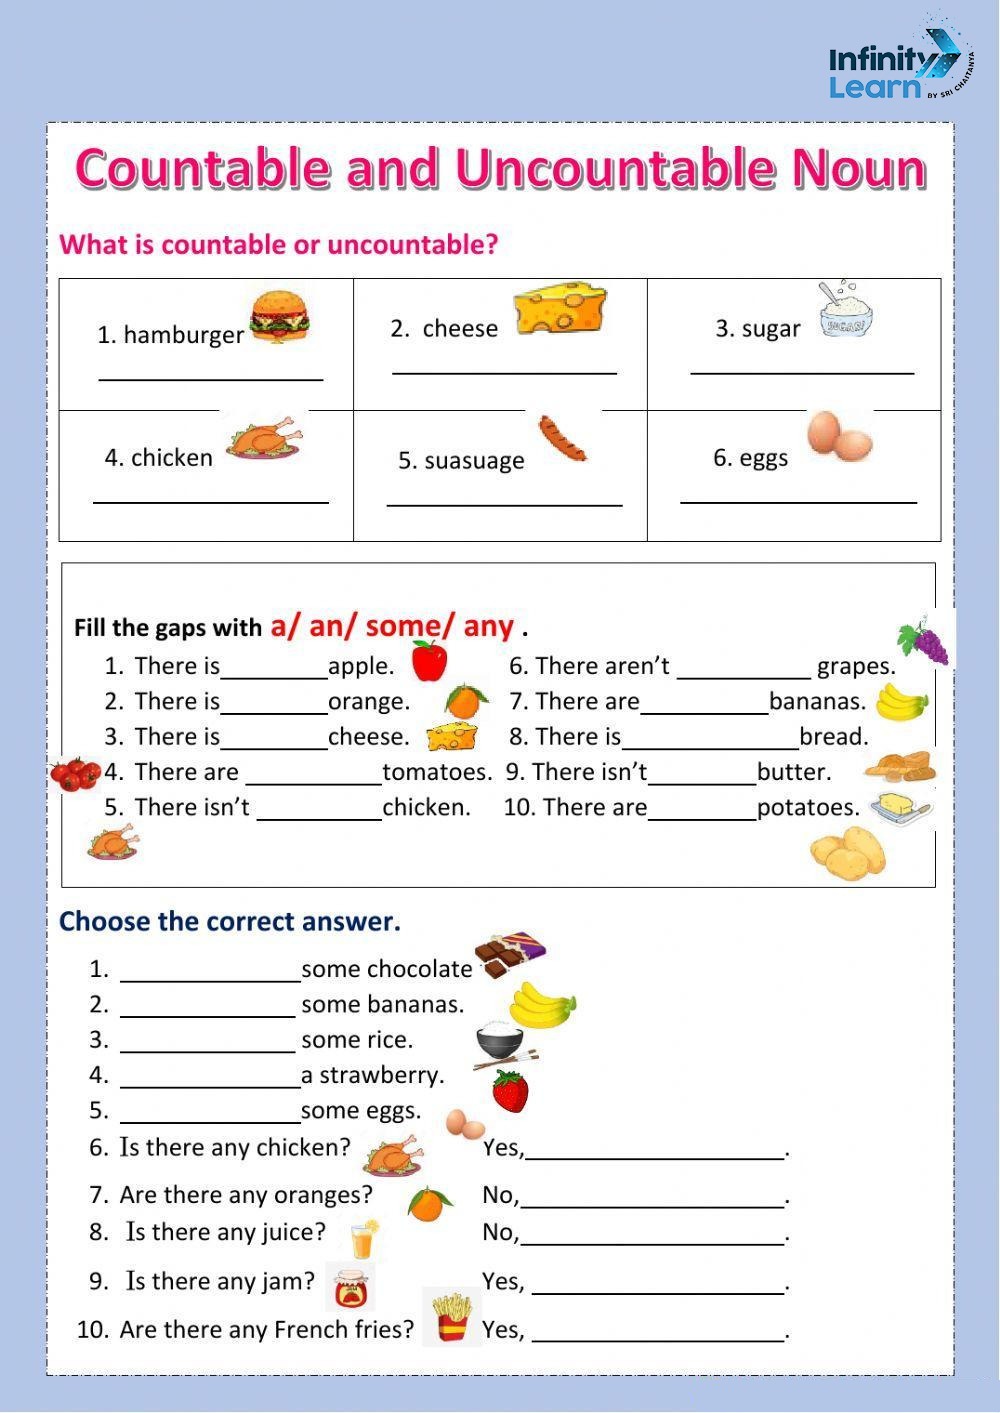 Countable and Uncountable Nouns Worksheet 